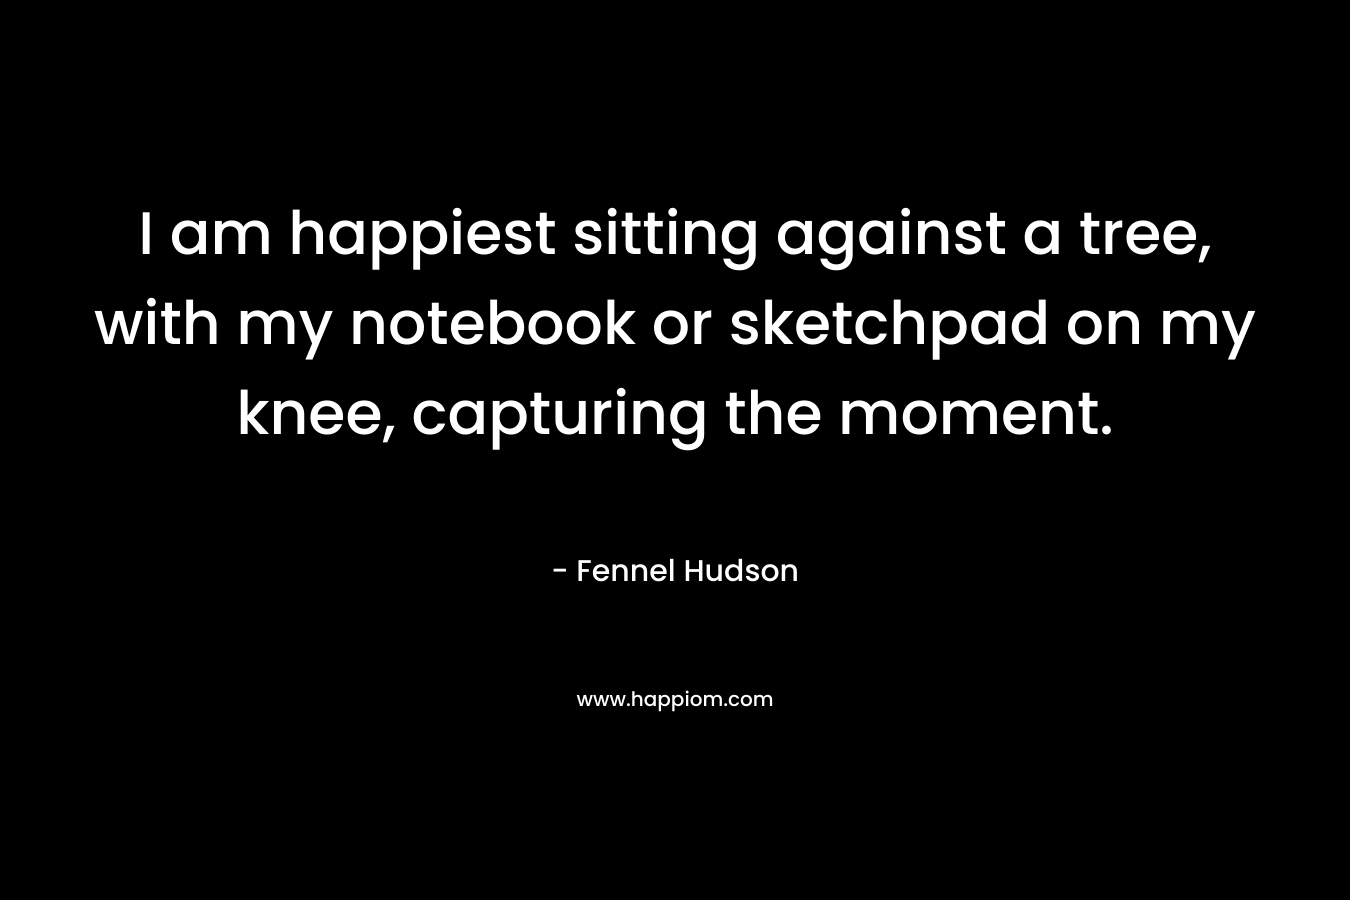 I am happiest sitting against a tree, with my notebook or sketchpad on my knee, capturing the moment.